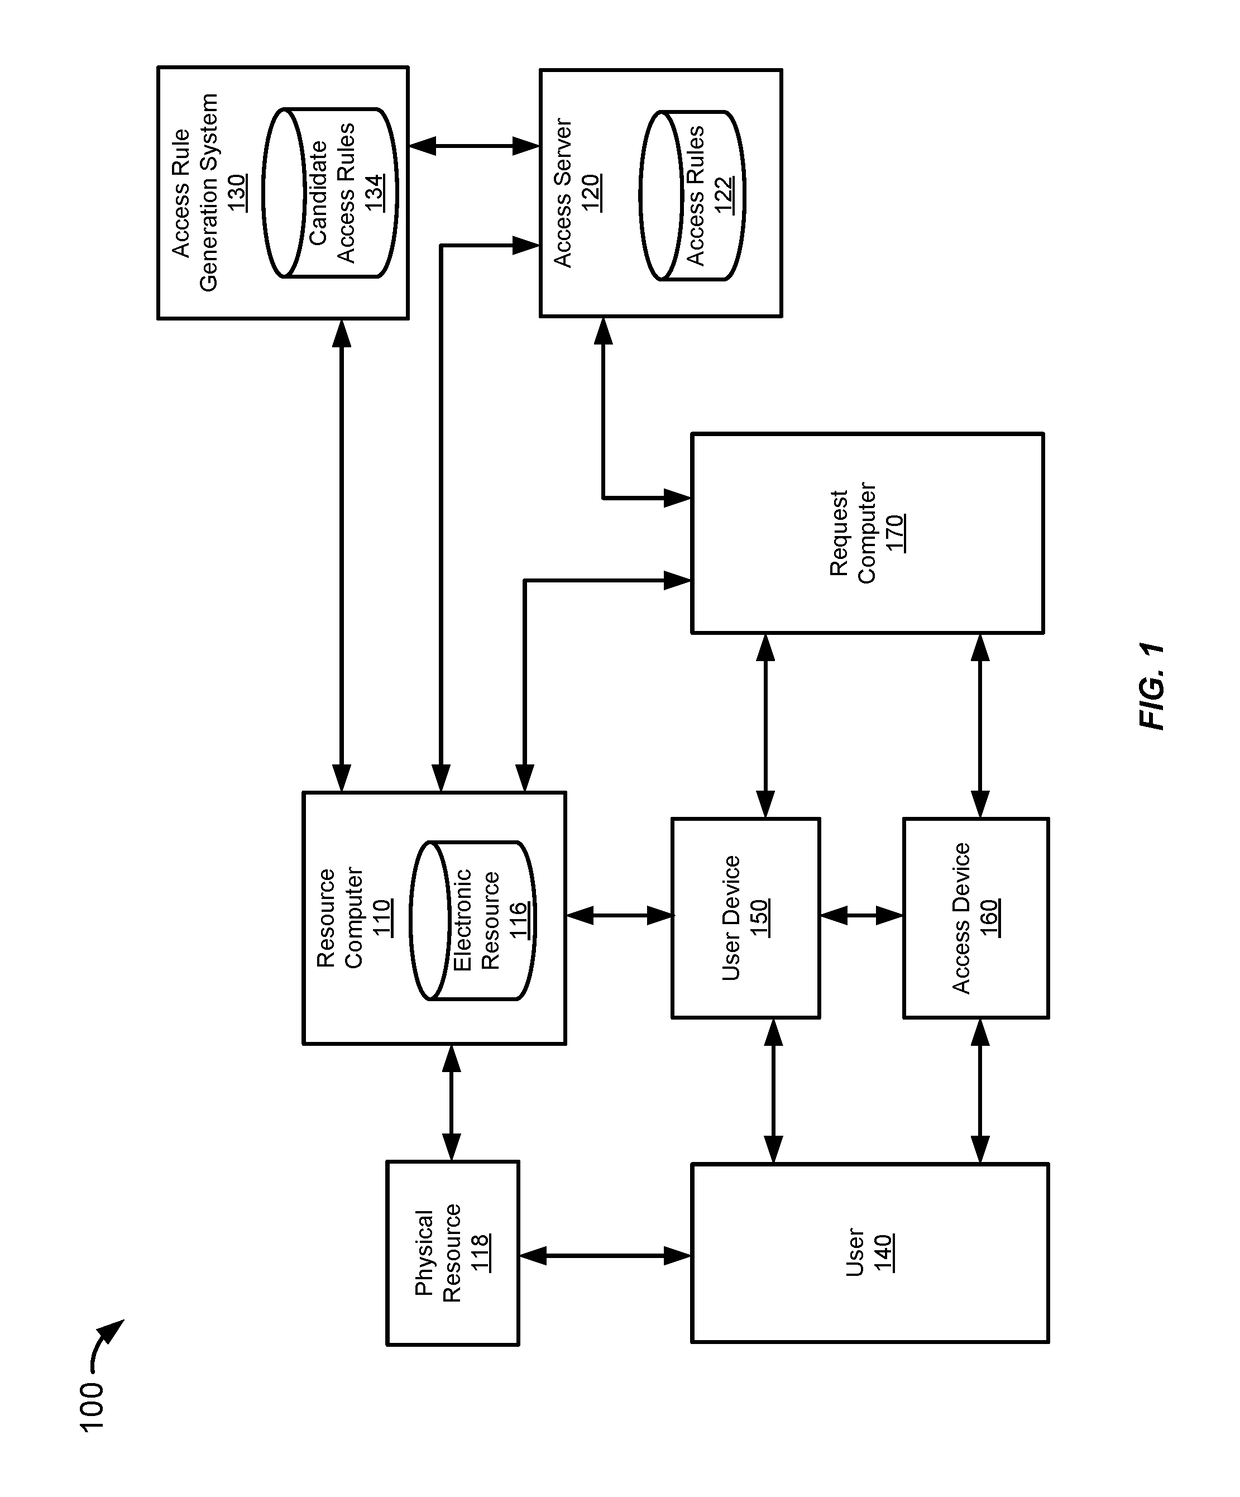 Systems and methods for generation and selection of access rules